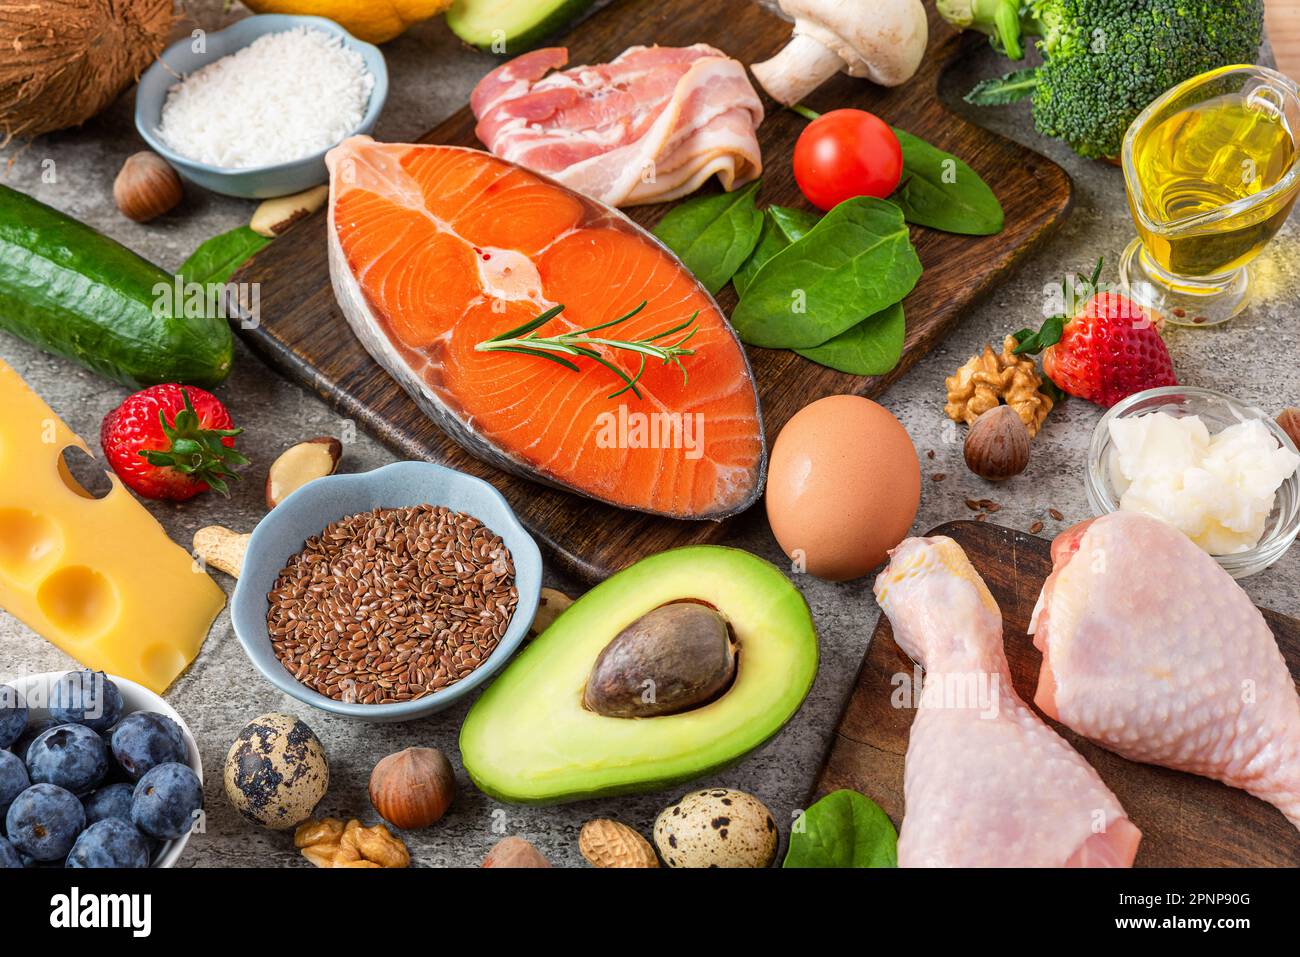 Healthy balanced diet food. Keto, low carb, atkins diet concept. Fish, meat, fruits vegetables, berries, mushroom and nuts Stock Photo